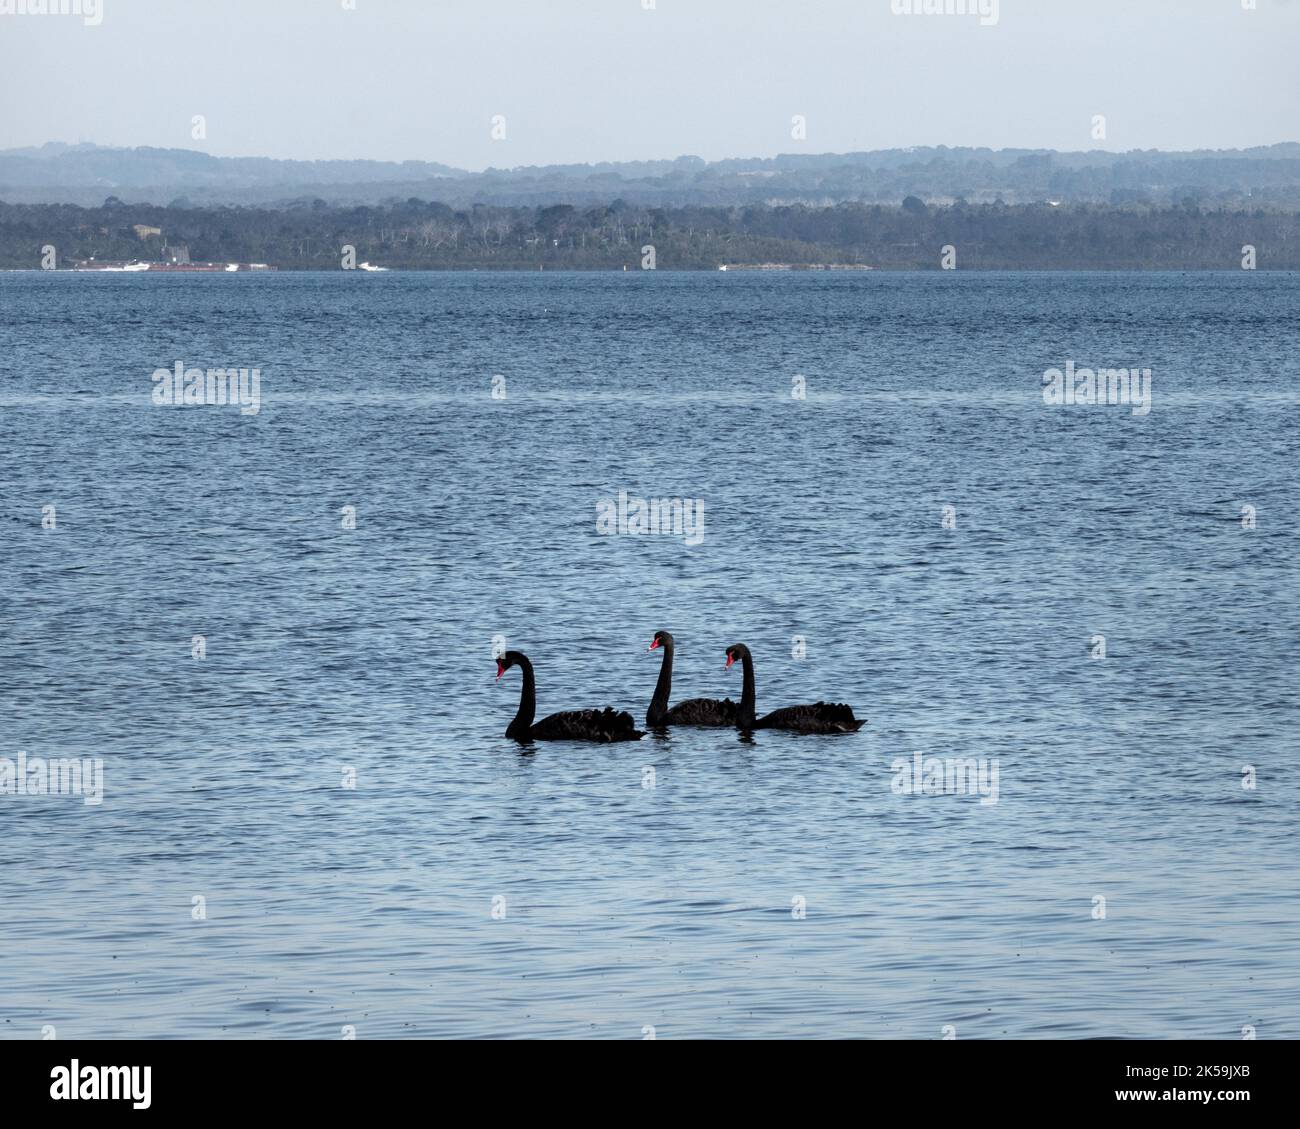 Three black swans on the water at French Island, Australia Stock Photo